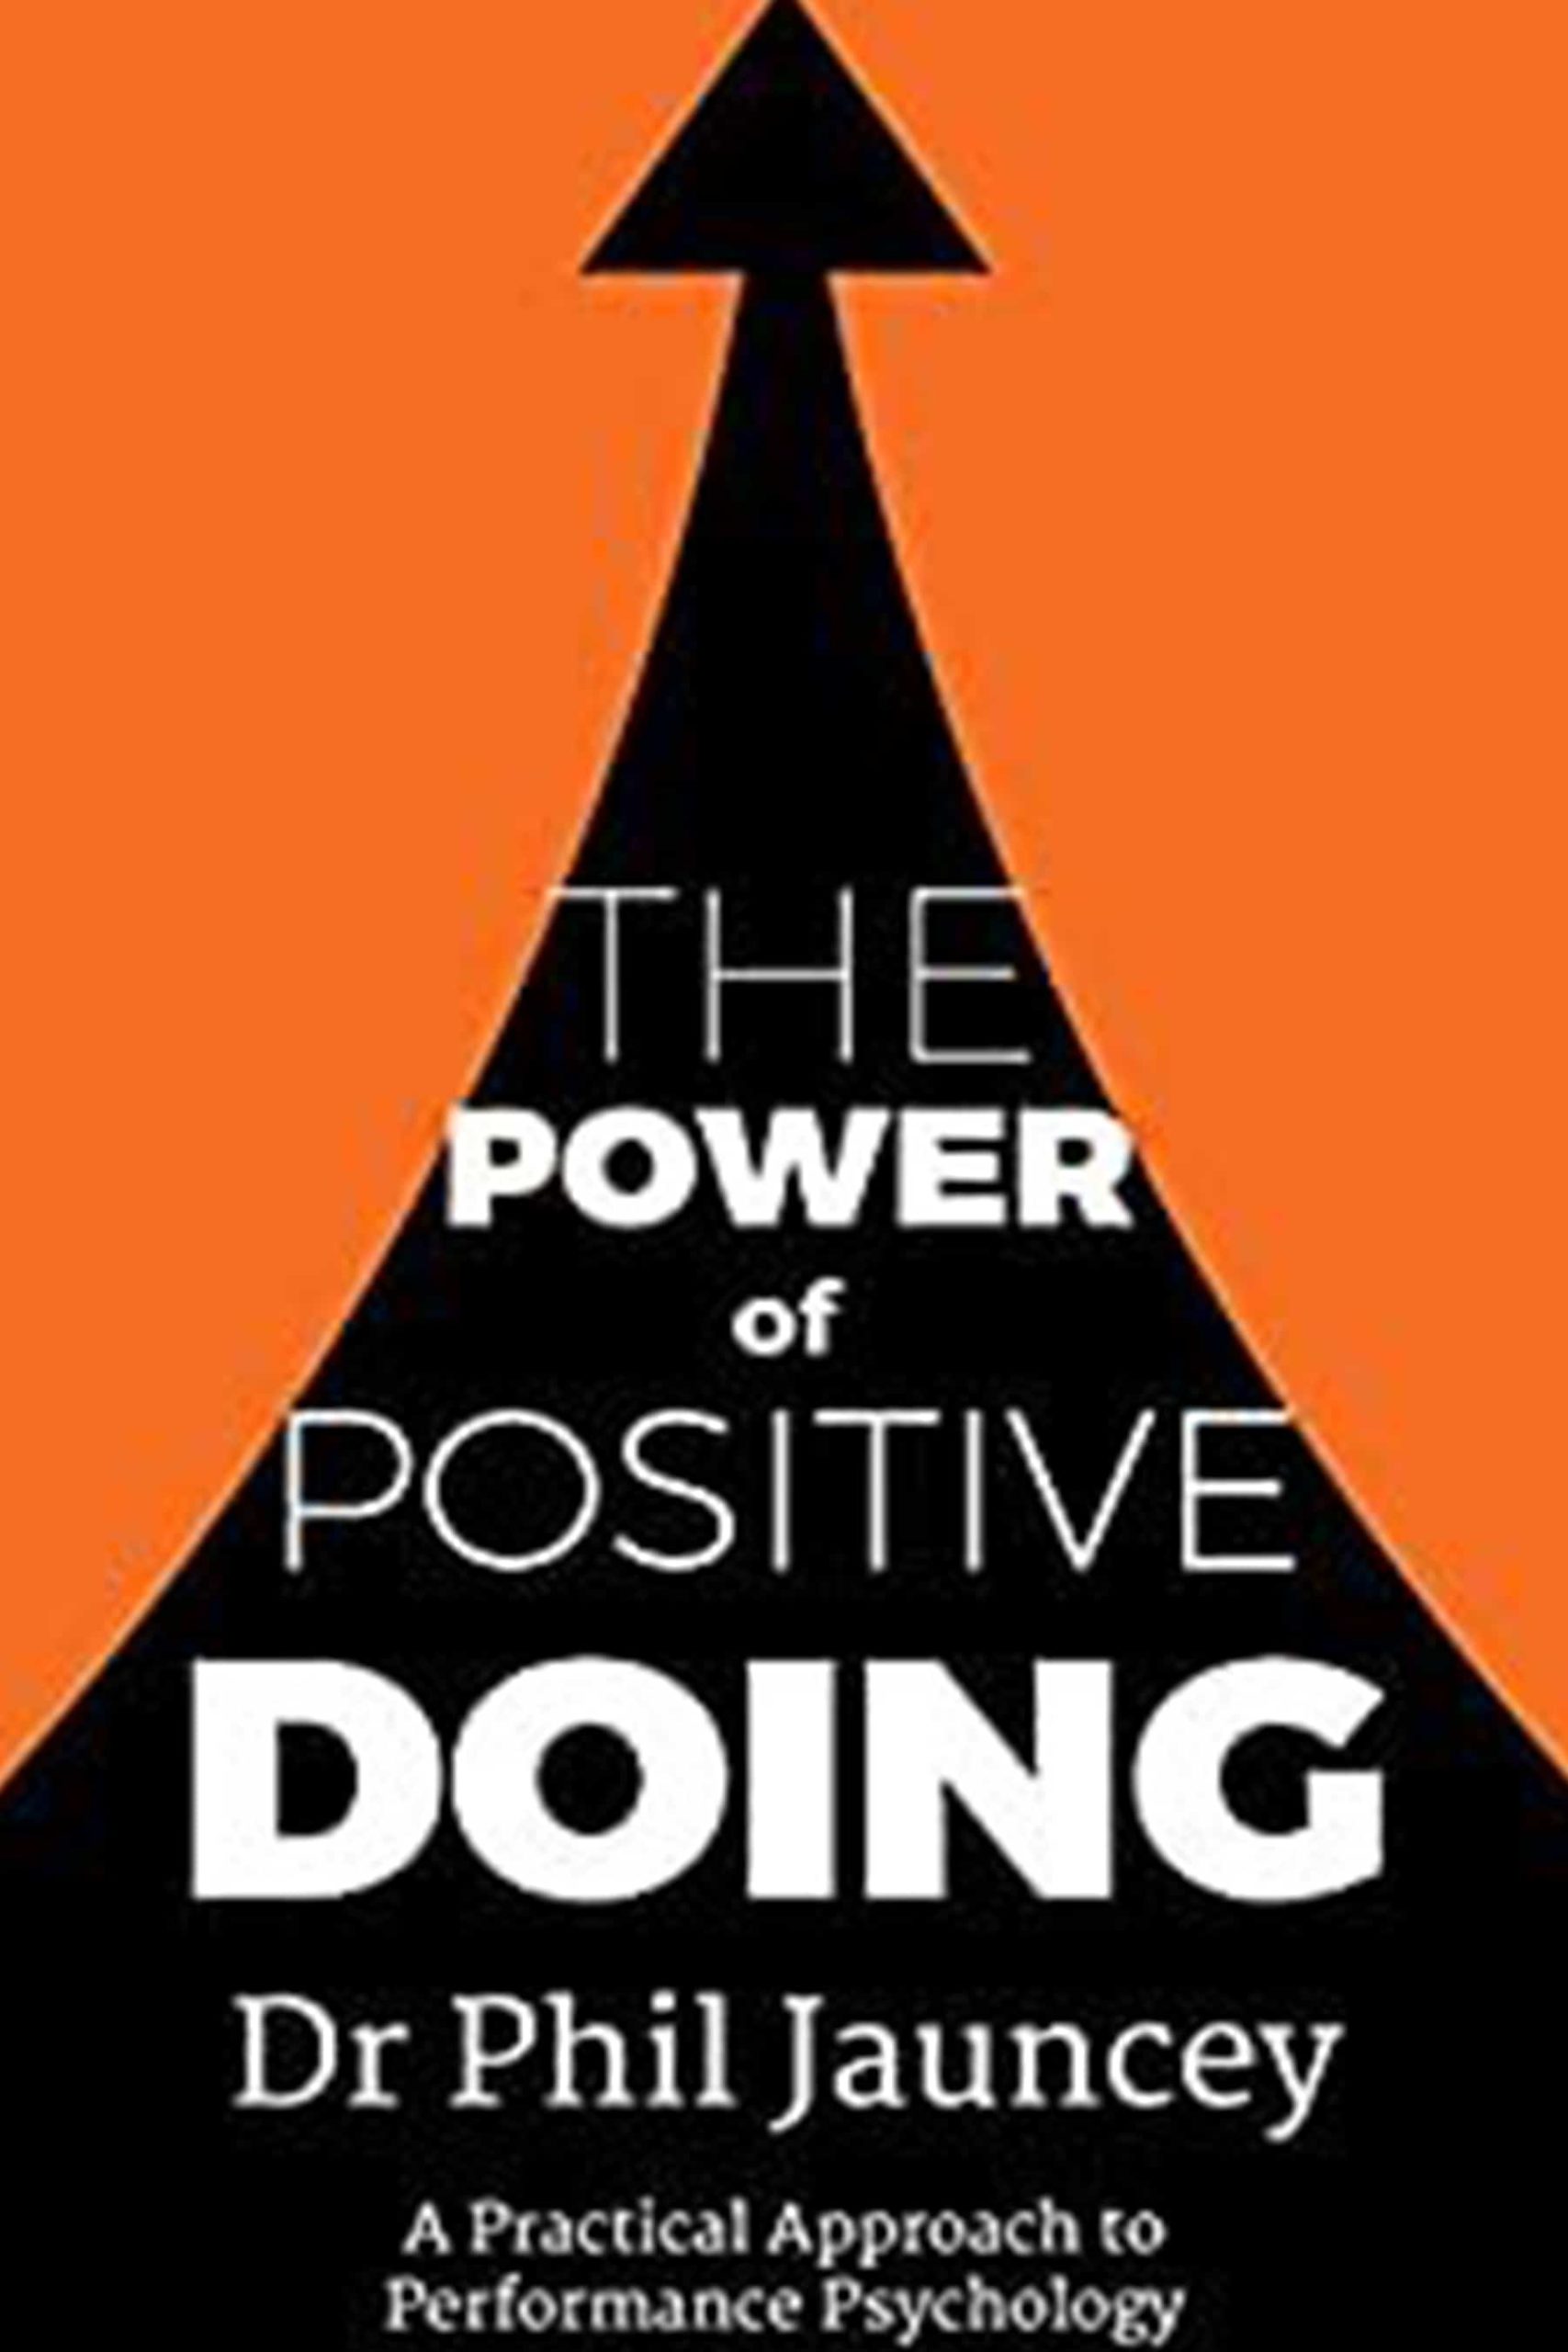 The Power of Positive Doing: A Practical Approach to Performance Psychology